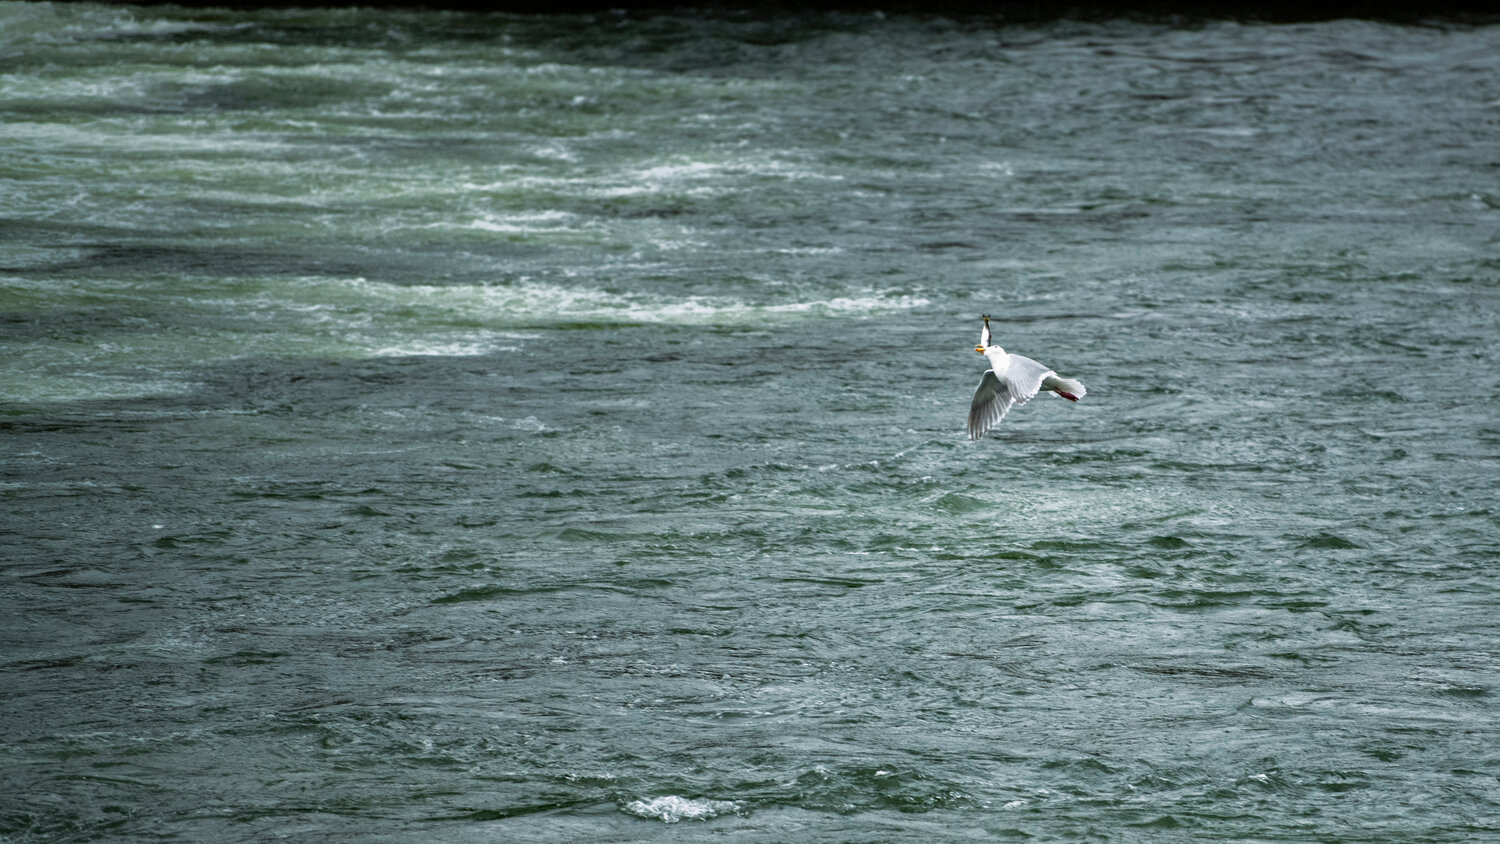 A seagull tilts back its head and swallows a fish outside the Cowlitz Salmon Hatchery in Salkum on Monday.